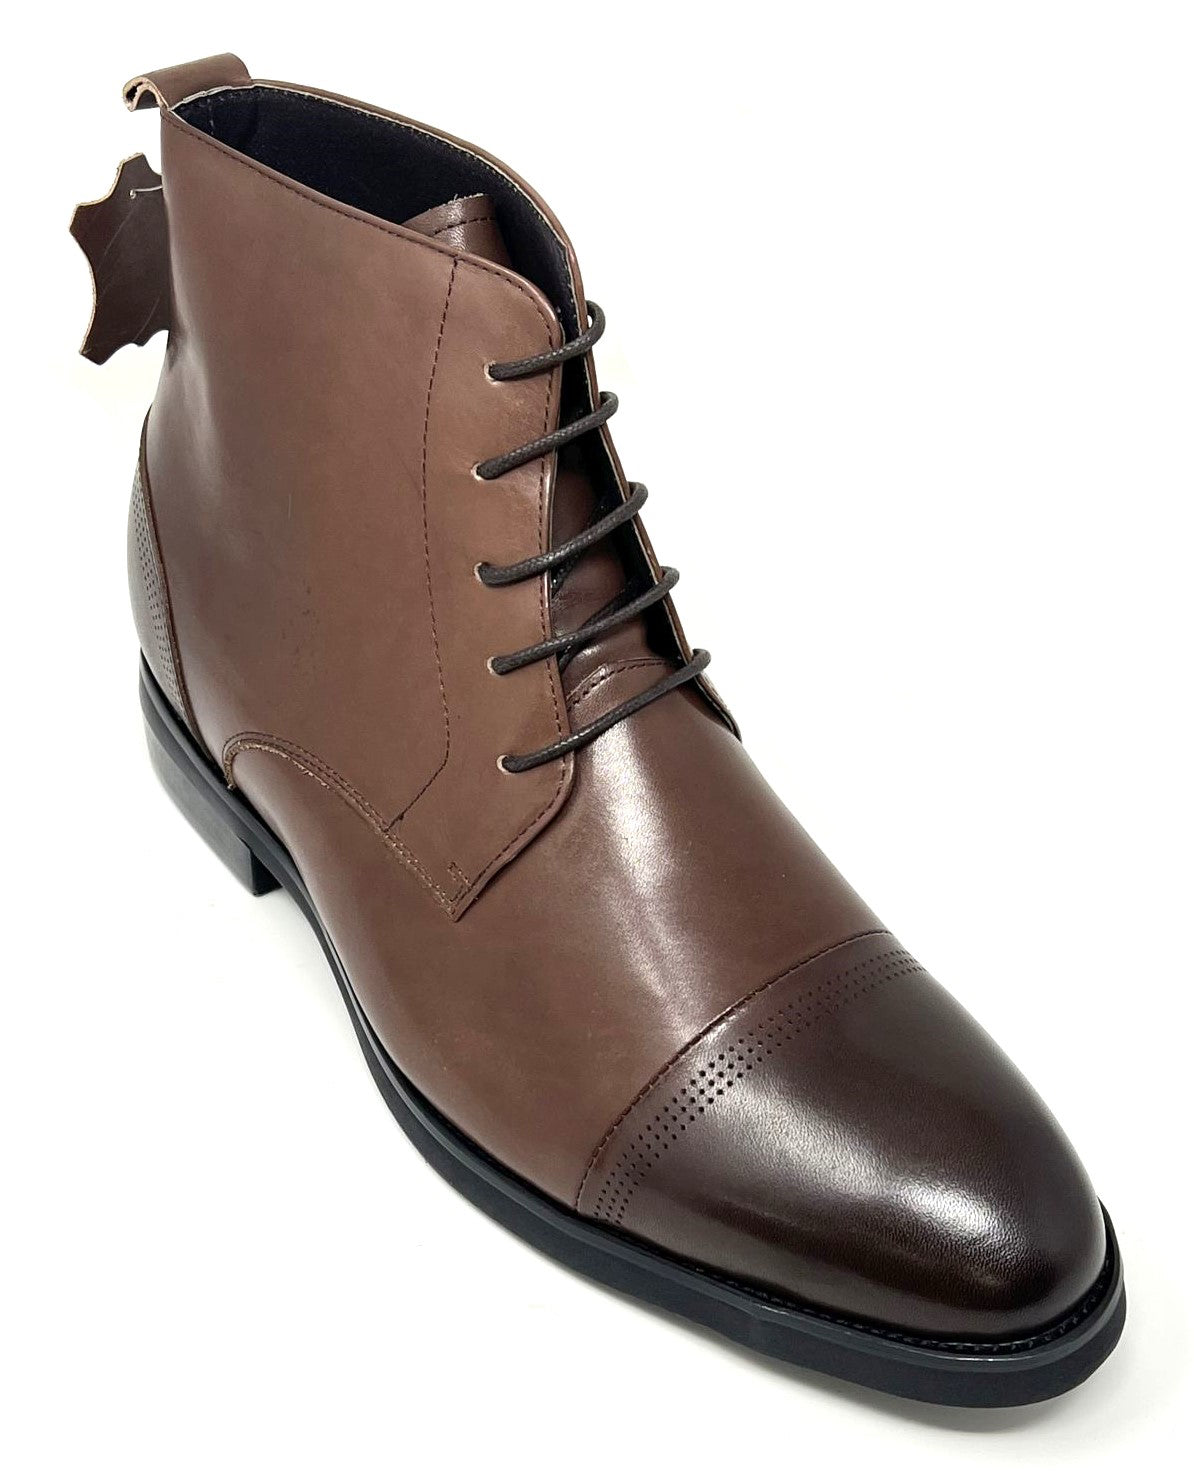 FSJ0073 - 2.8 Inches Taller (Brown) - Size 11 Only